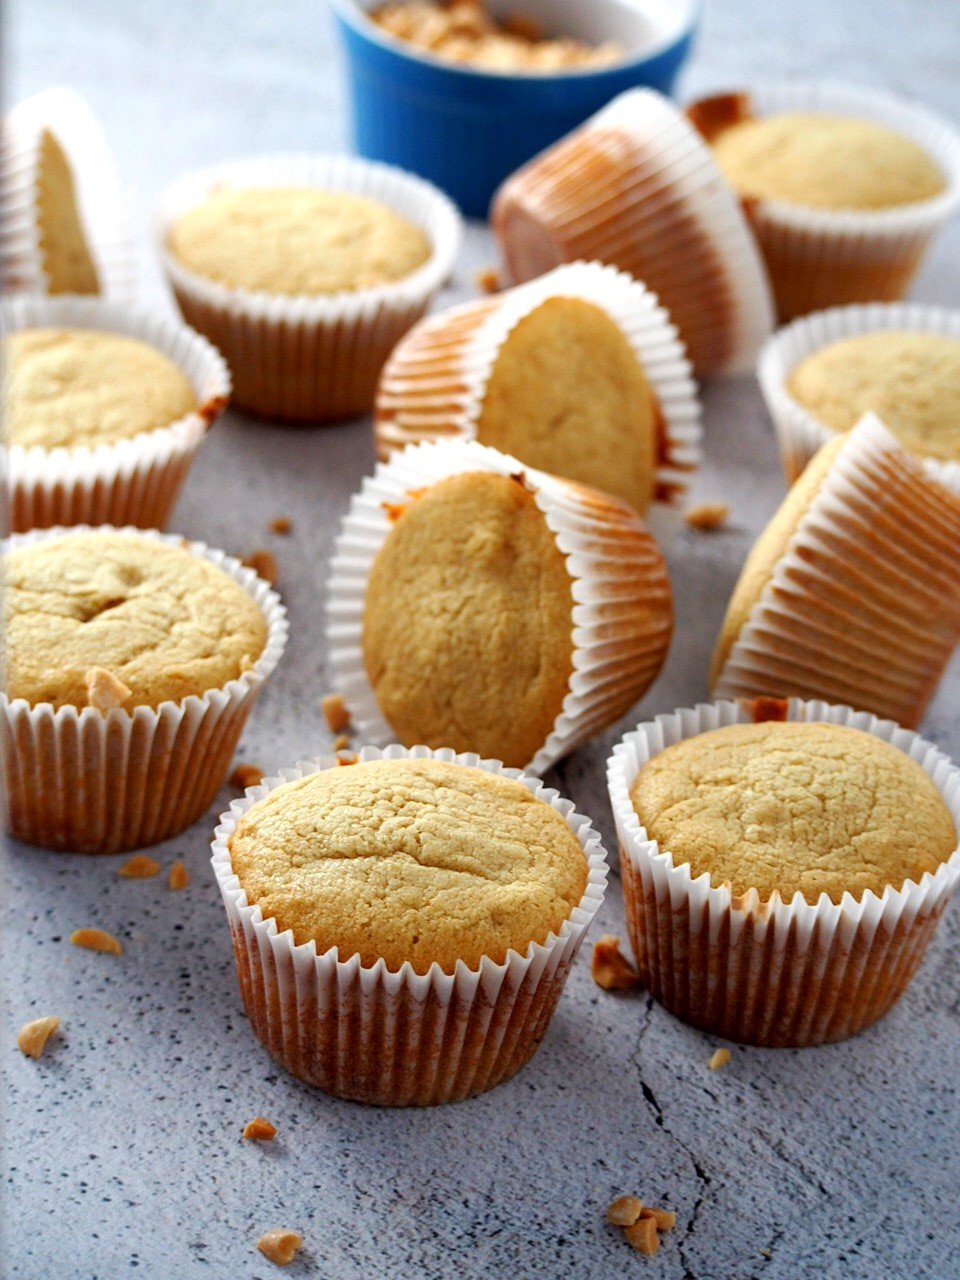 Peanut butter cupcakes without chocolate glaze.